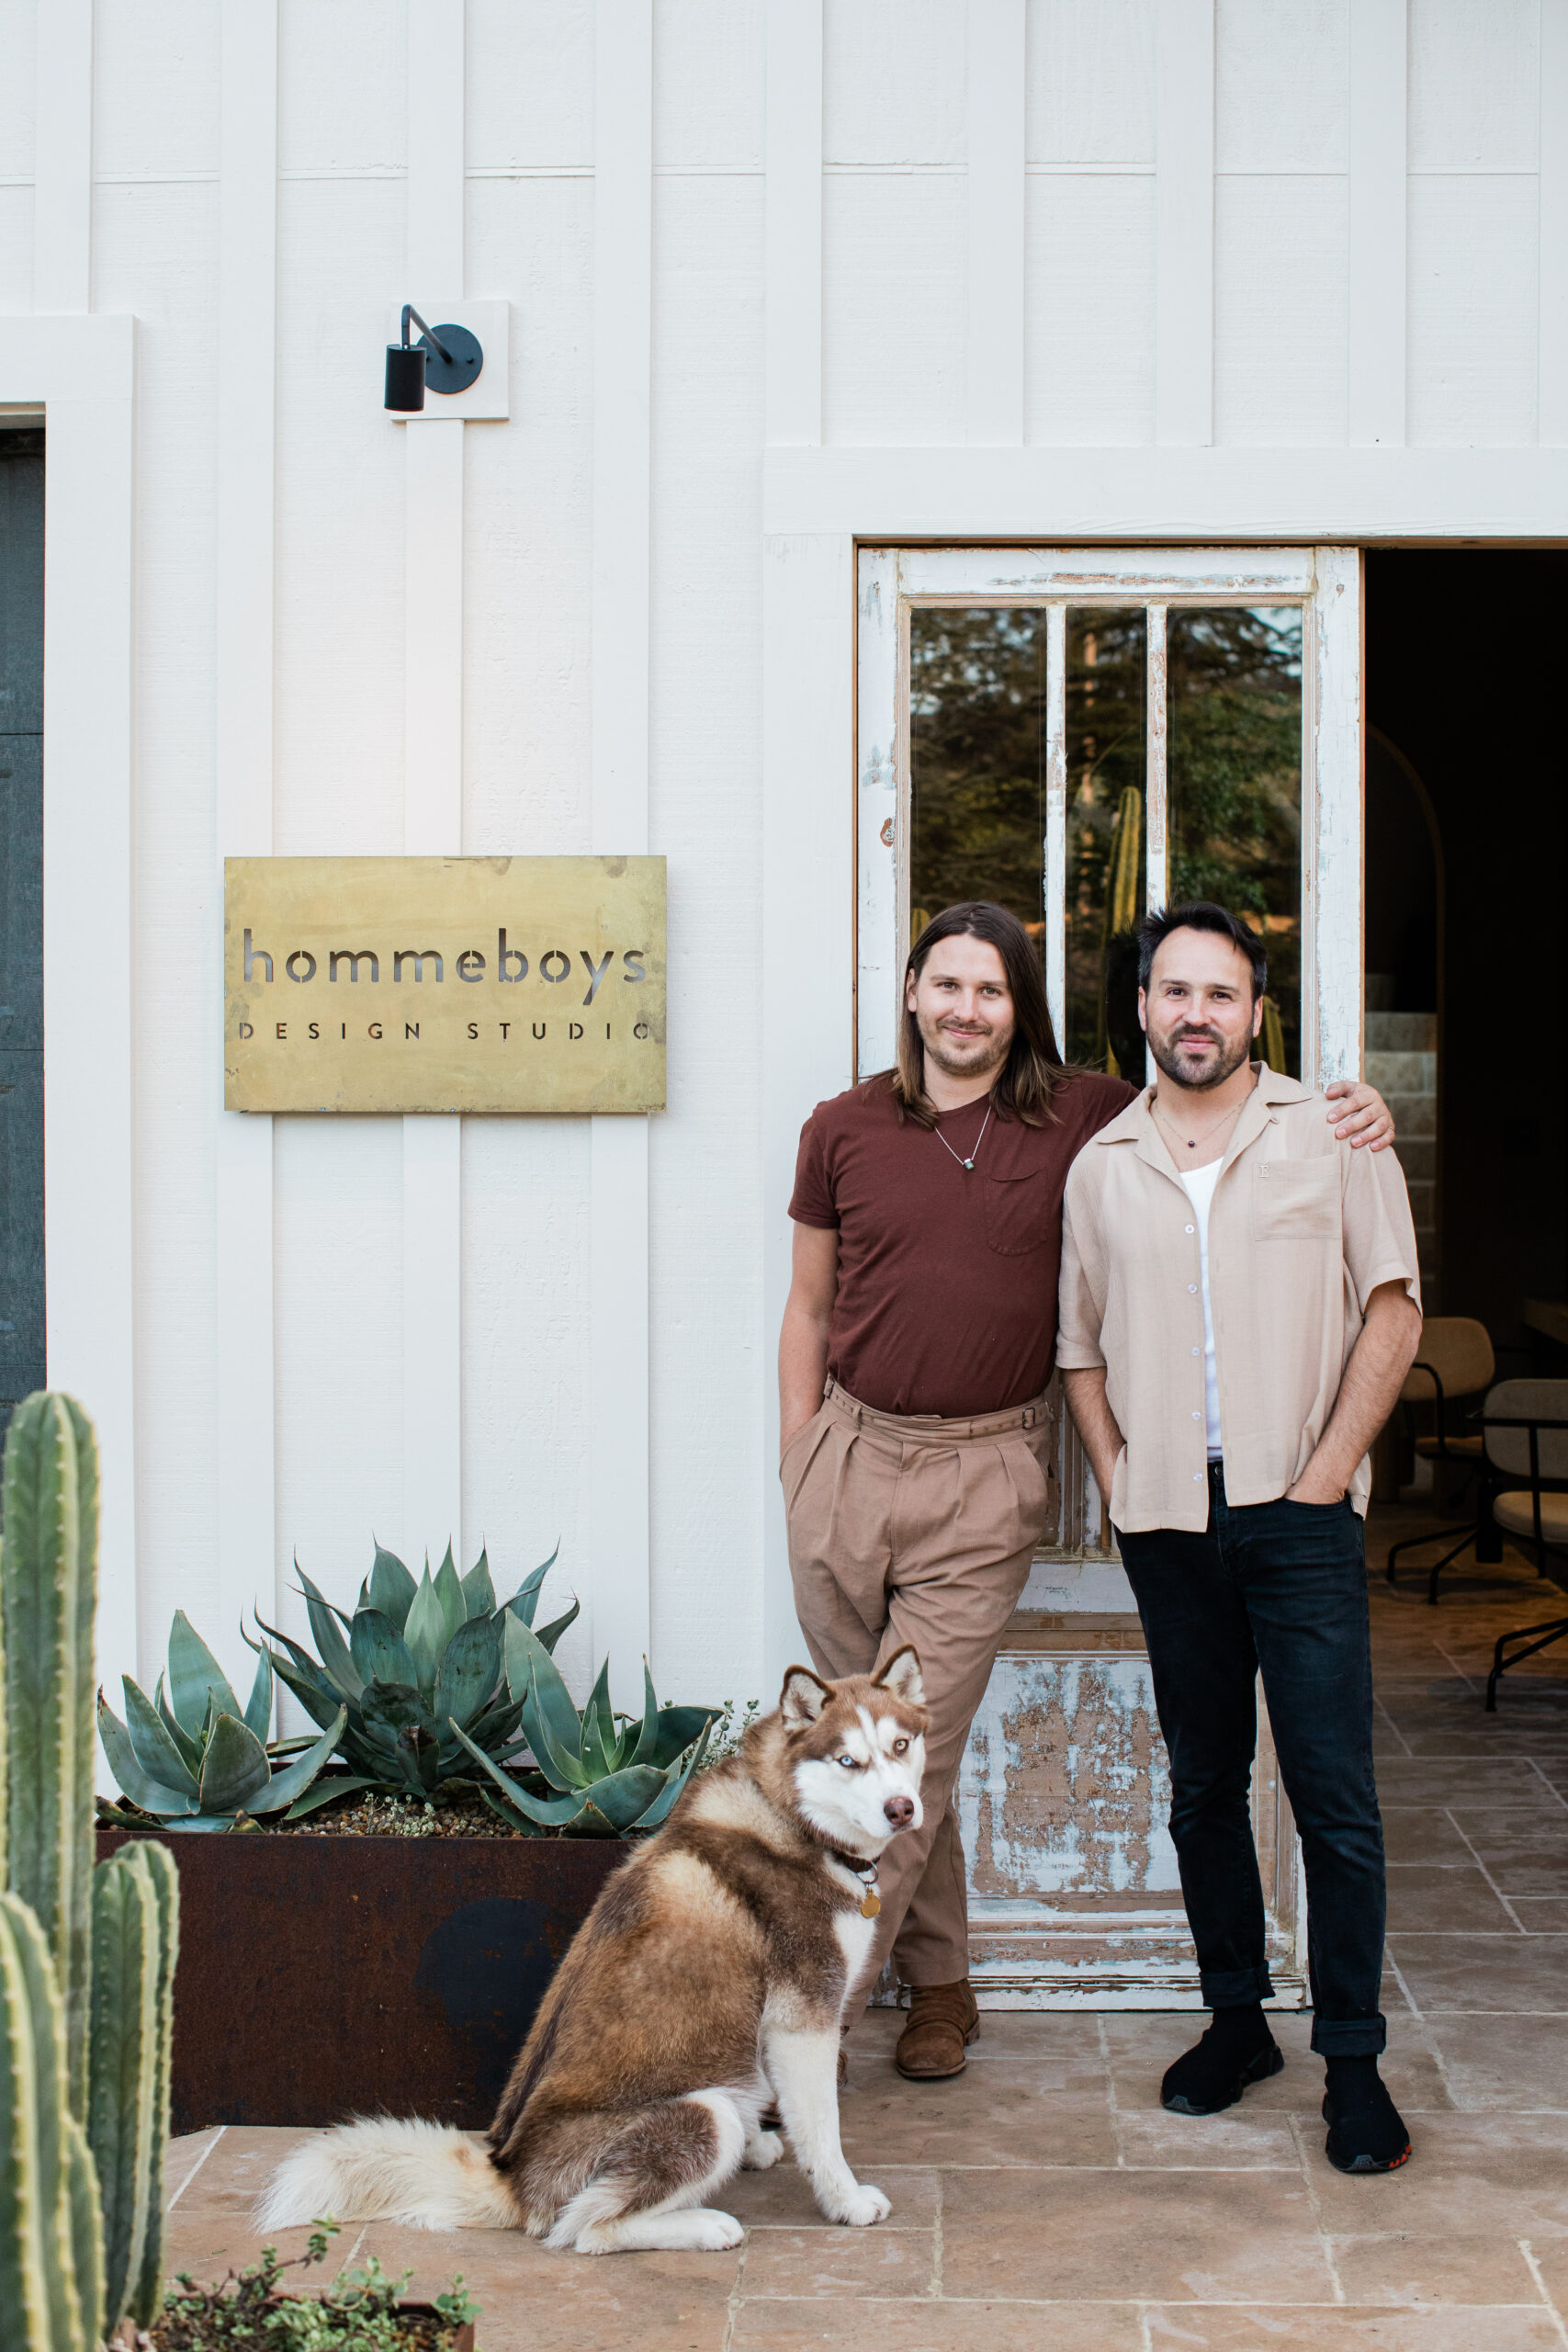 Rising star interior designers the Hommeboys practice what they preach at their newly renovated home and design studio in Sonoma. (Eileen Roche/For Sonoma Magazine)